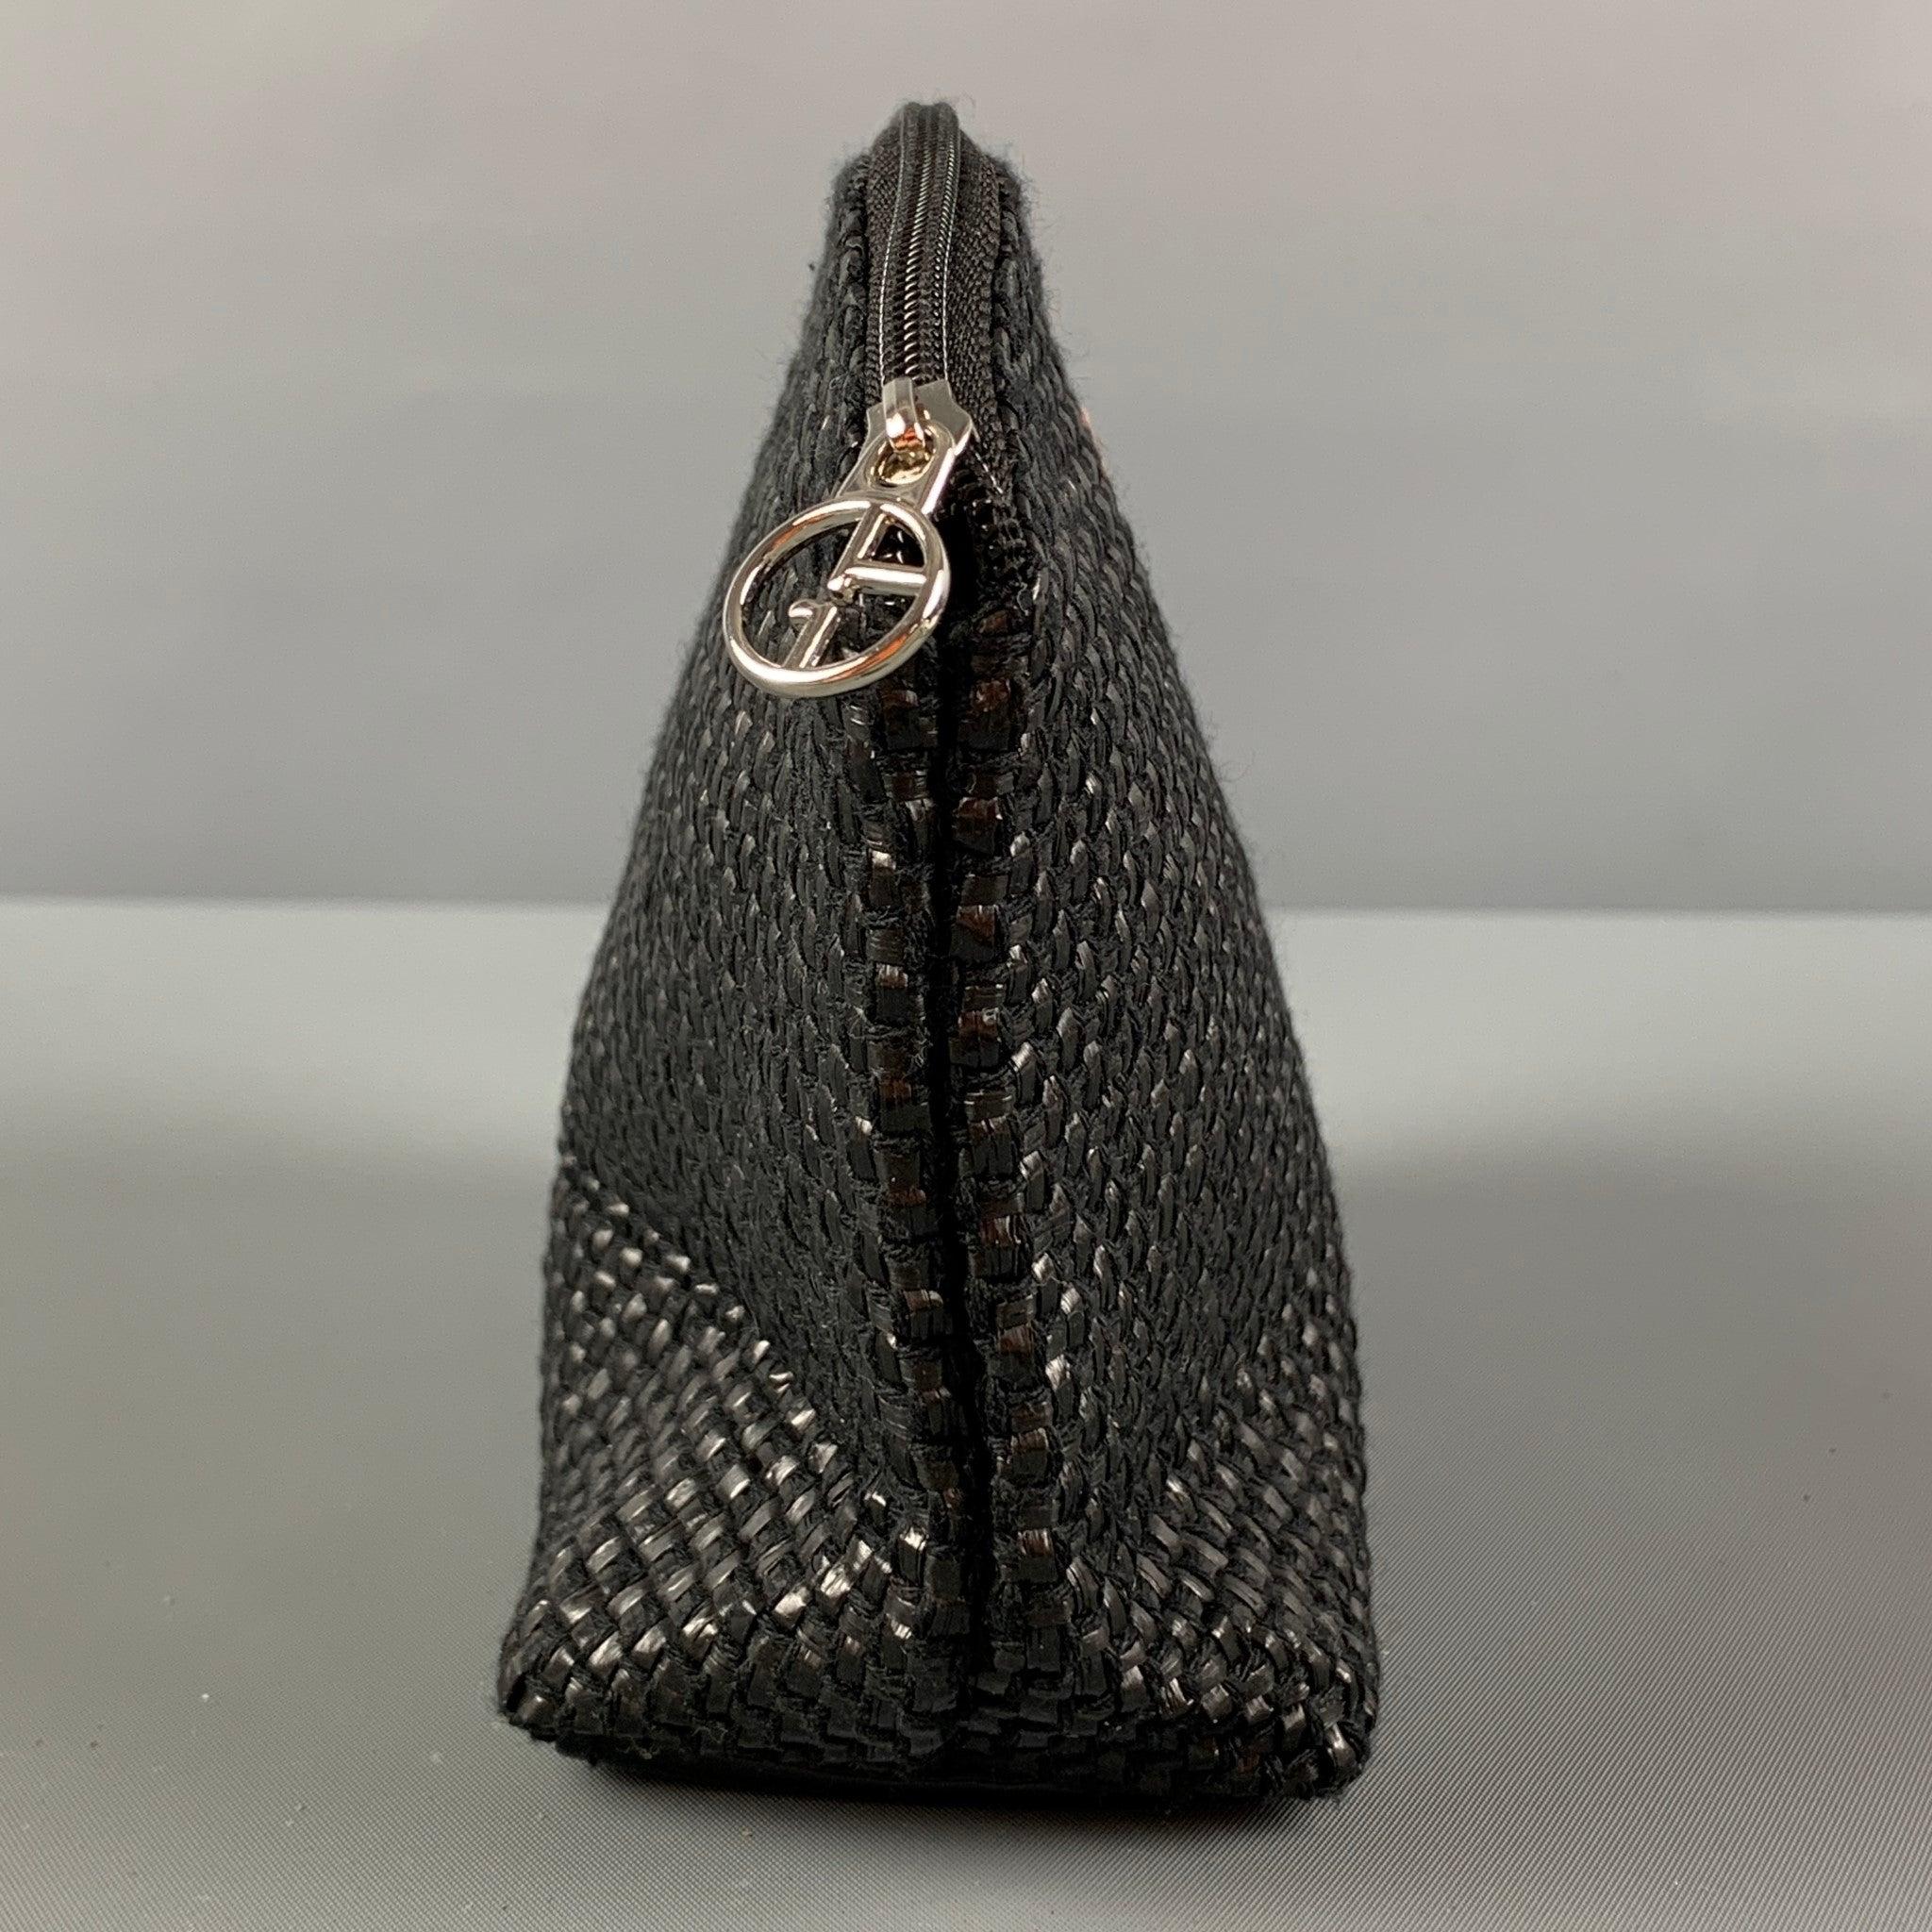 GIORGIO ARMANI make-up bag comes in a black woven patent leather featuring a zipper closure.
Very Good
Pre-Owned Condition. 

Measurements: 
  Length: 6.25 inches  Width:
2.4 inches  Height: 5.5 inches 
  
  
 
Reference: 122554
Category: Handbag &